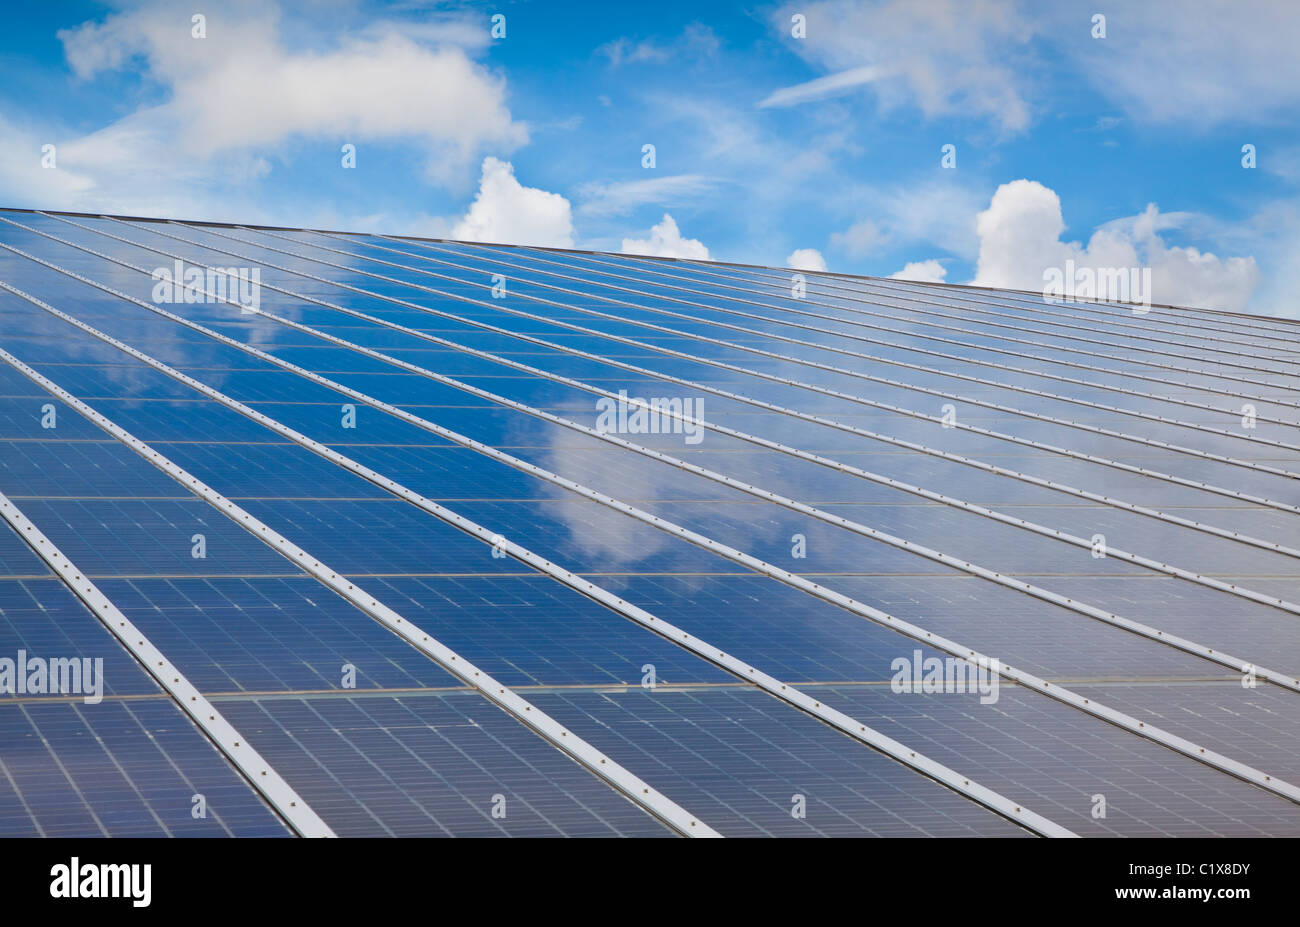 Large solar photovoltaic with cloud Reflection Stock Photo